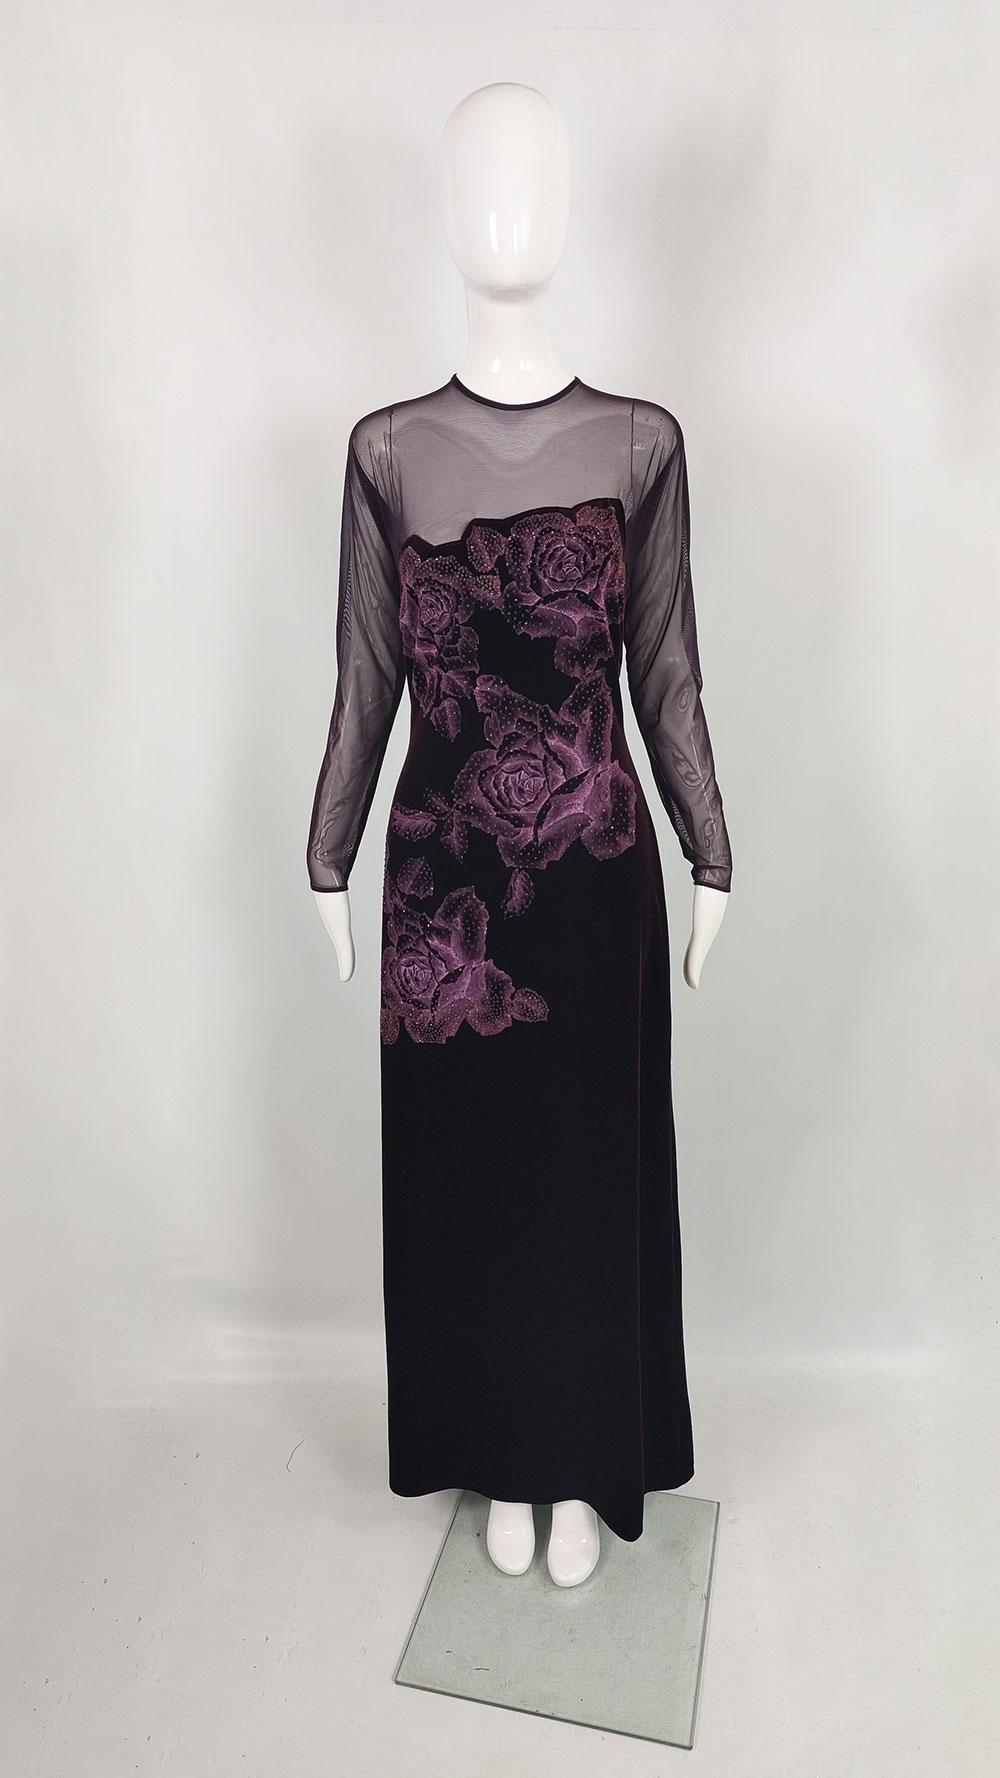 A stunning vintage womens evening dress / gown from the 90s by luxury fashion designer, Tadashi Shoji. In a dark reddish purple / aubergine velvet with incredible bold rose print and glitter details on the front. The front has a deep, asymmetrical